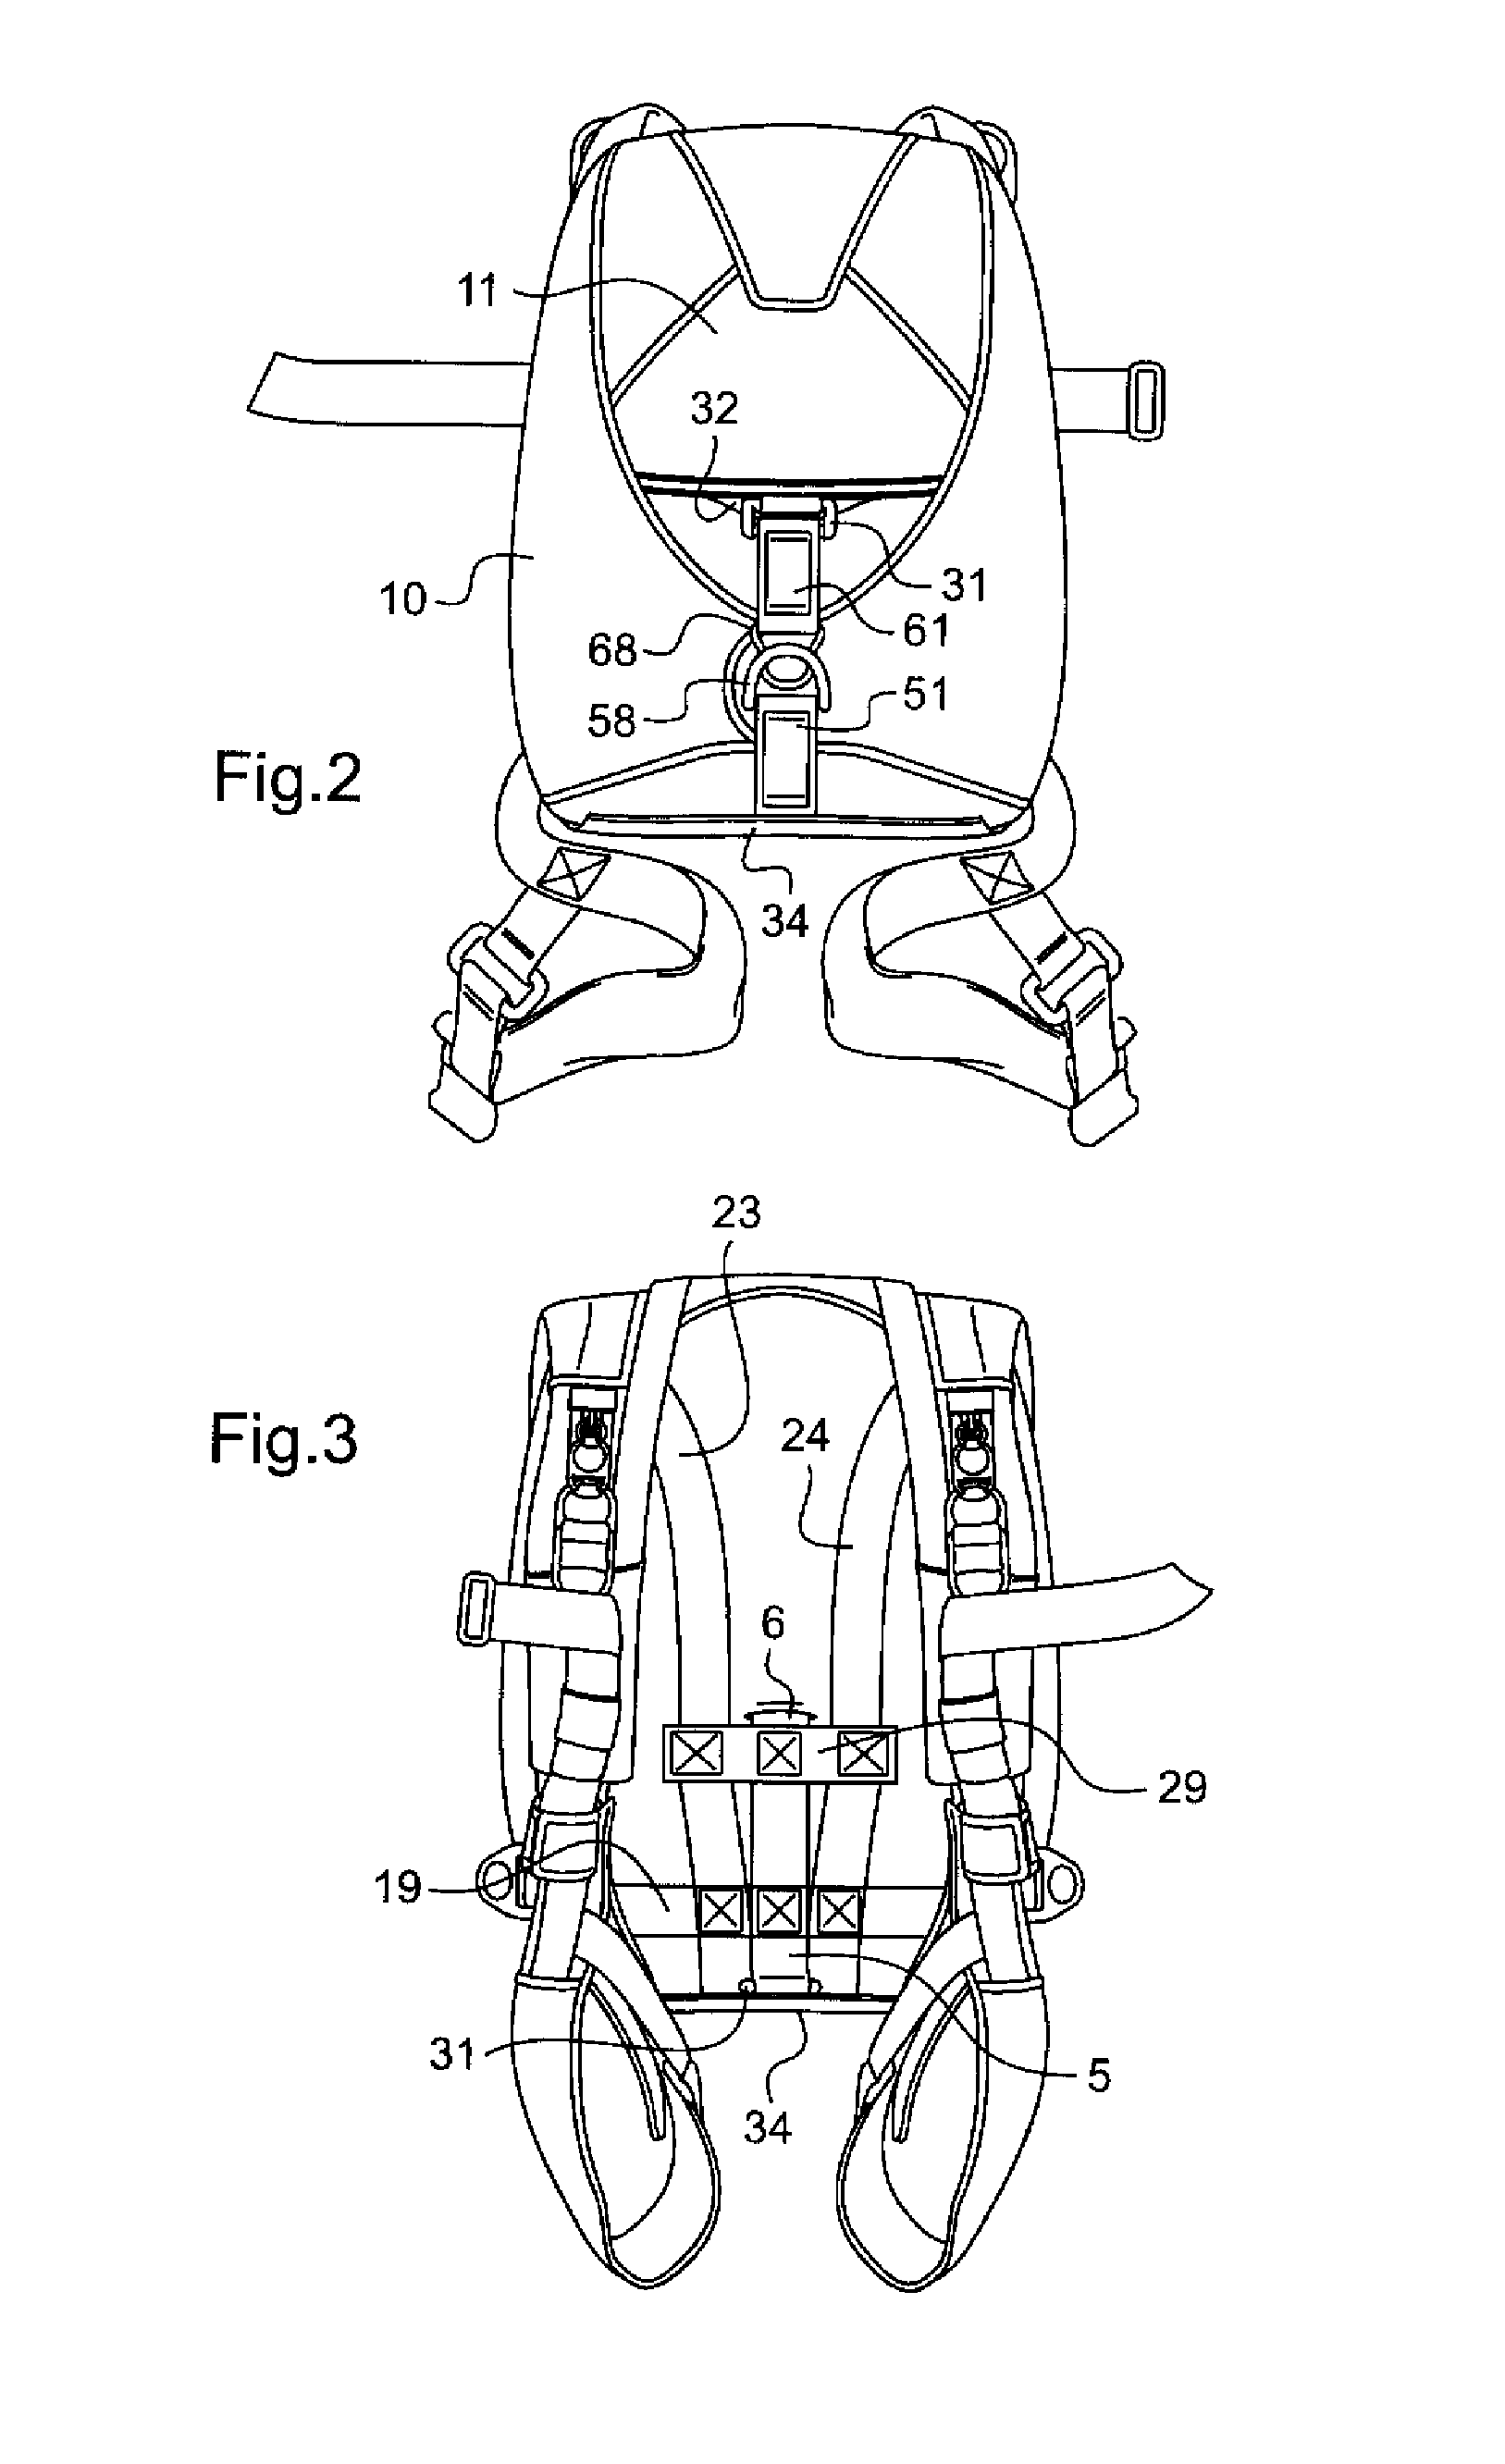 Skydiving equipment to distribute the tension forces of a drogue parachute